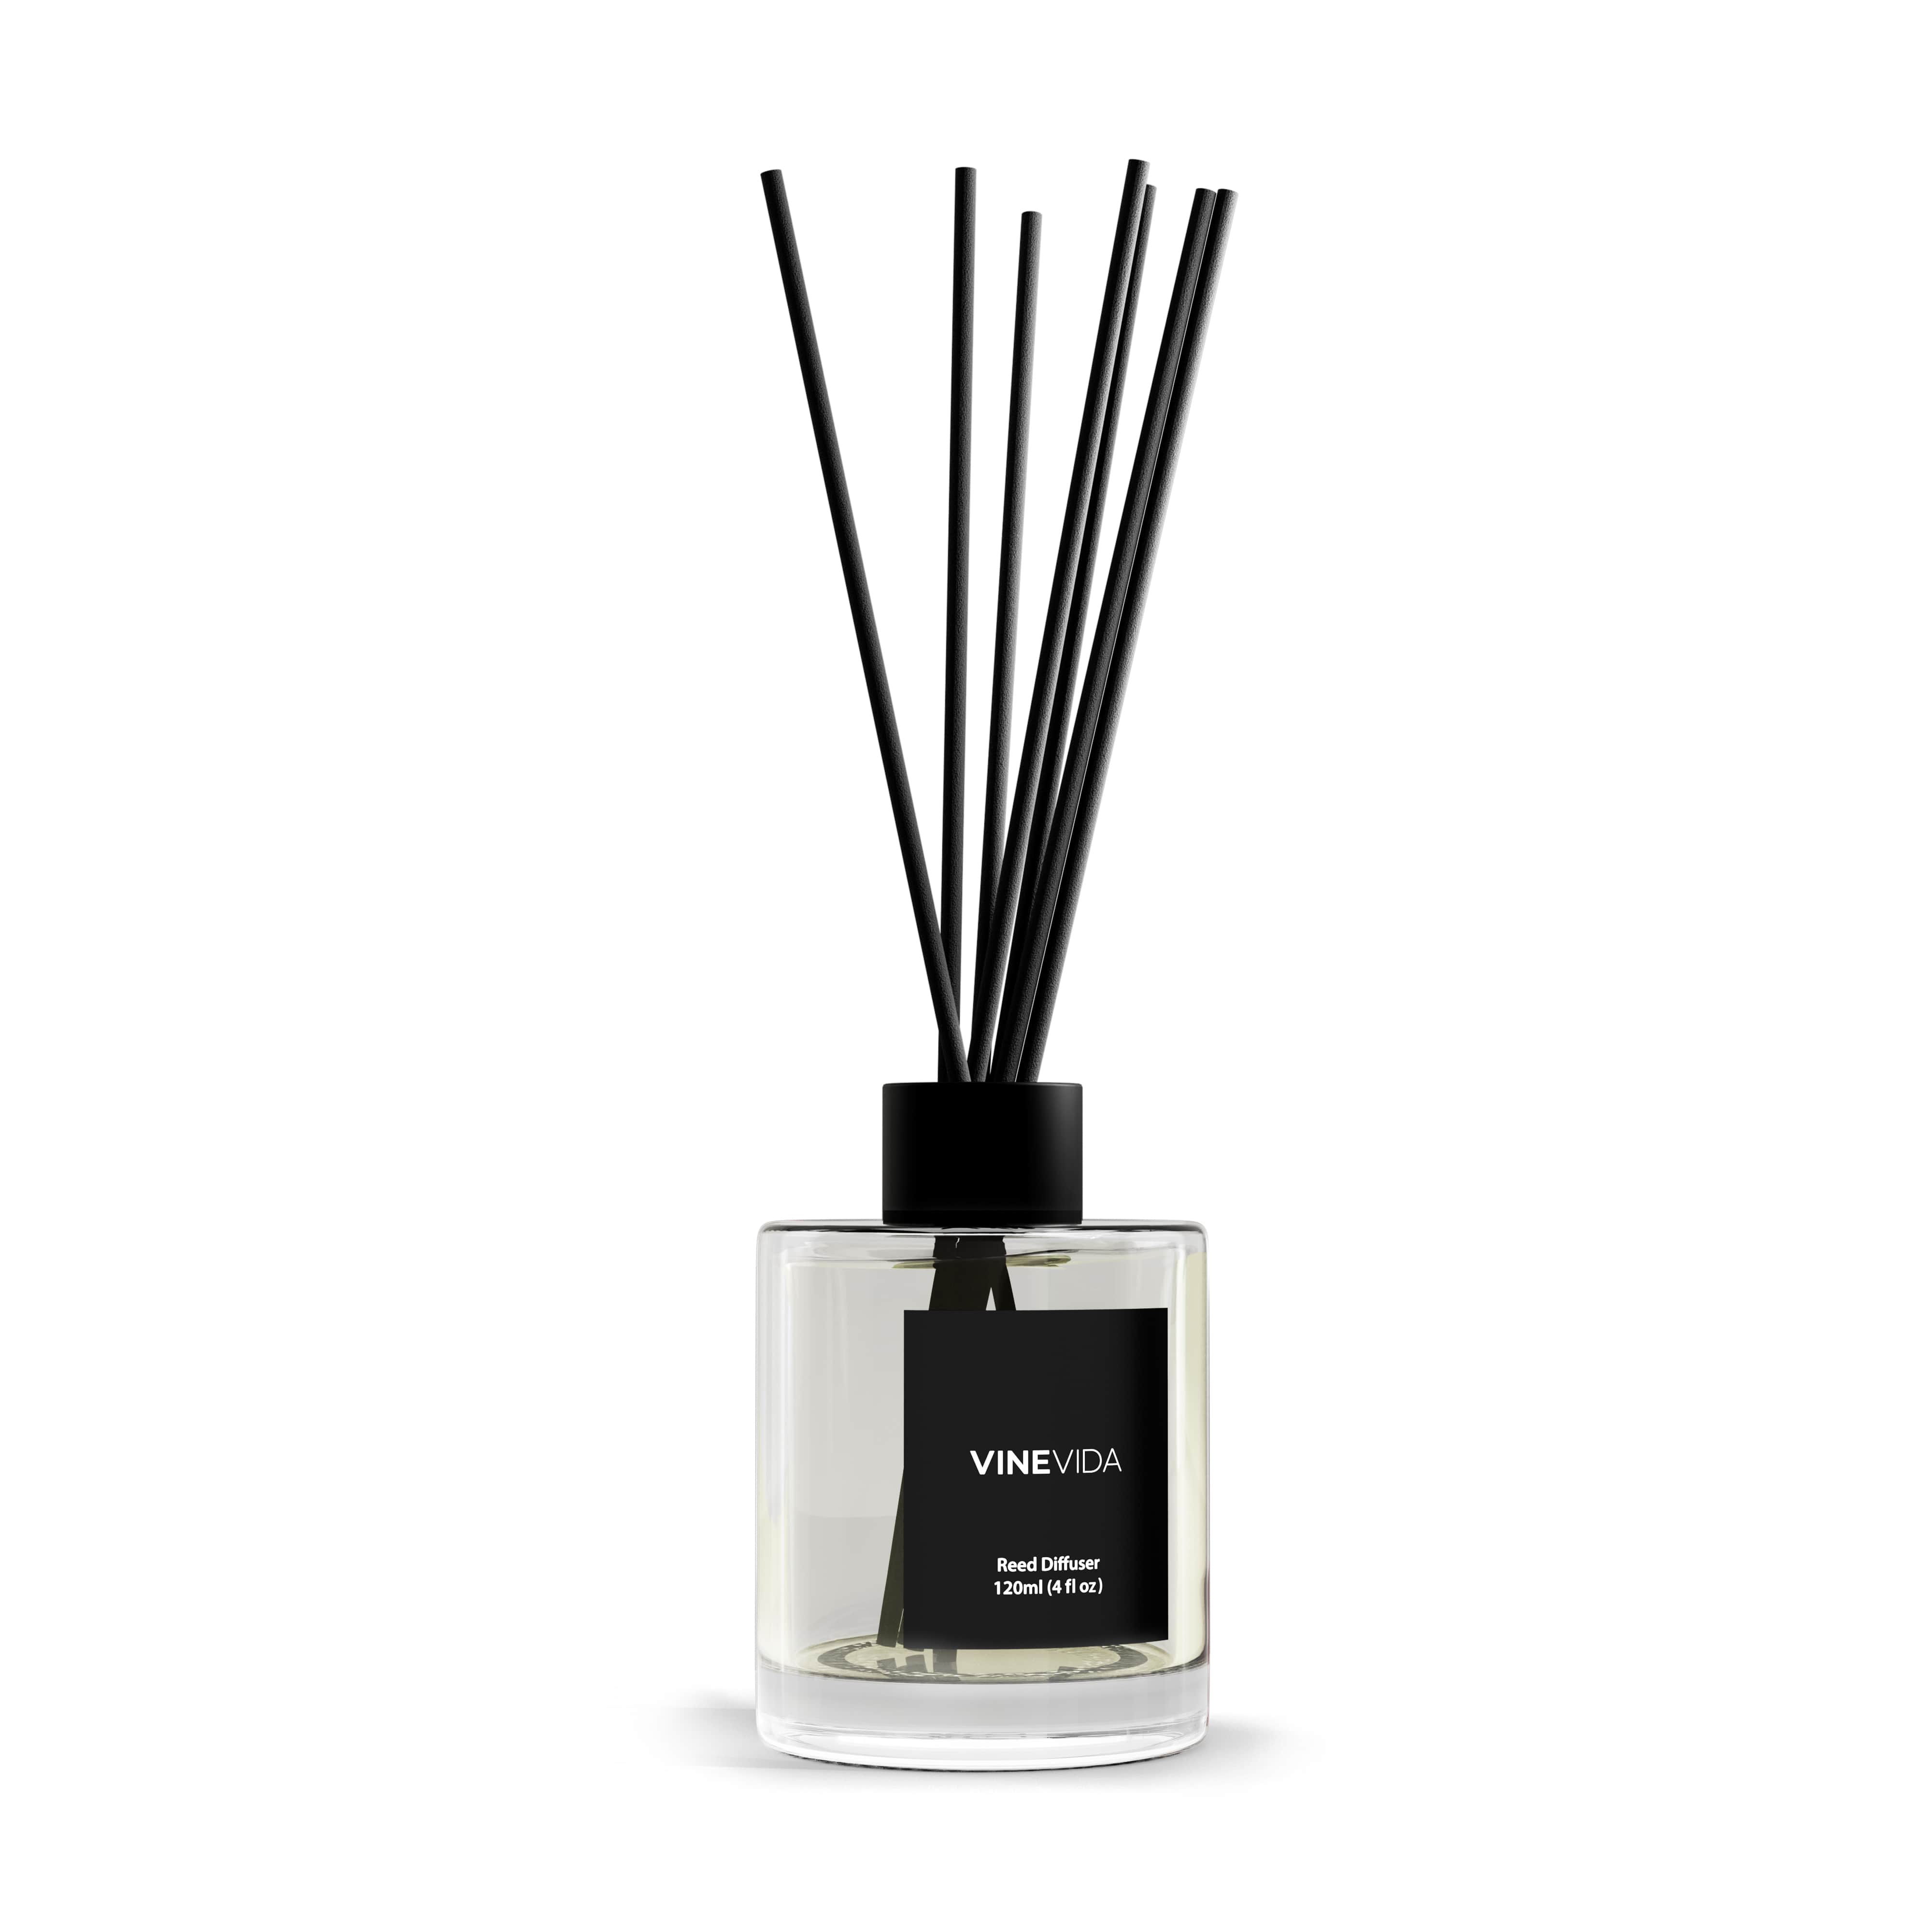 NO. 1305 Reed Diffuser - Inspired by: The Noir 29 by Le Labo